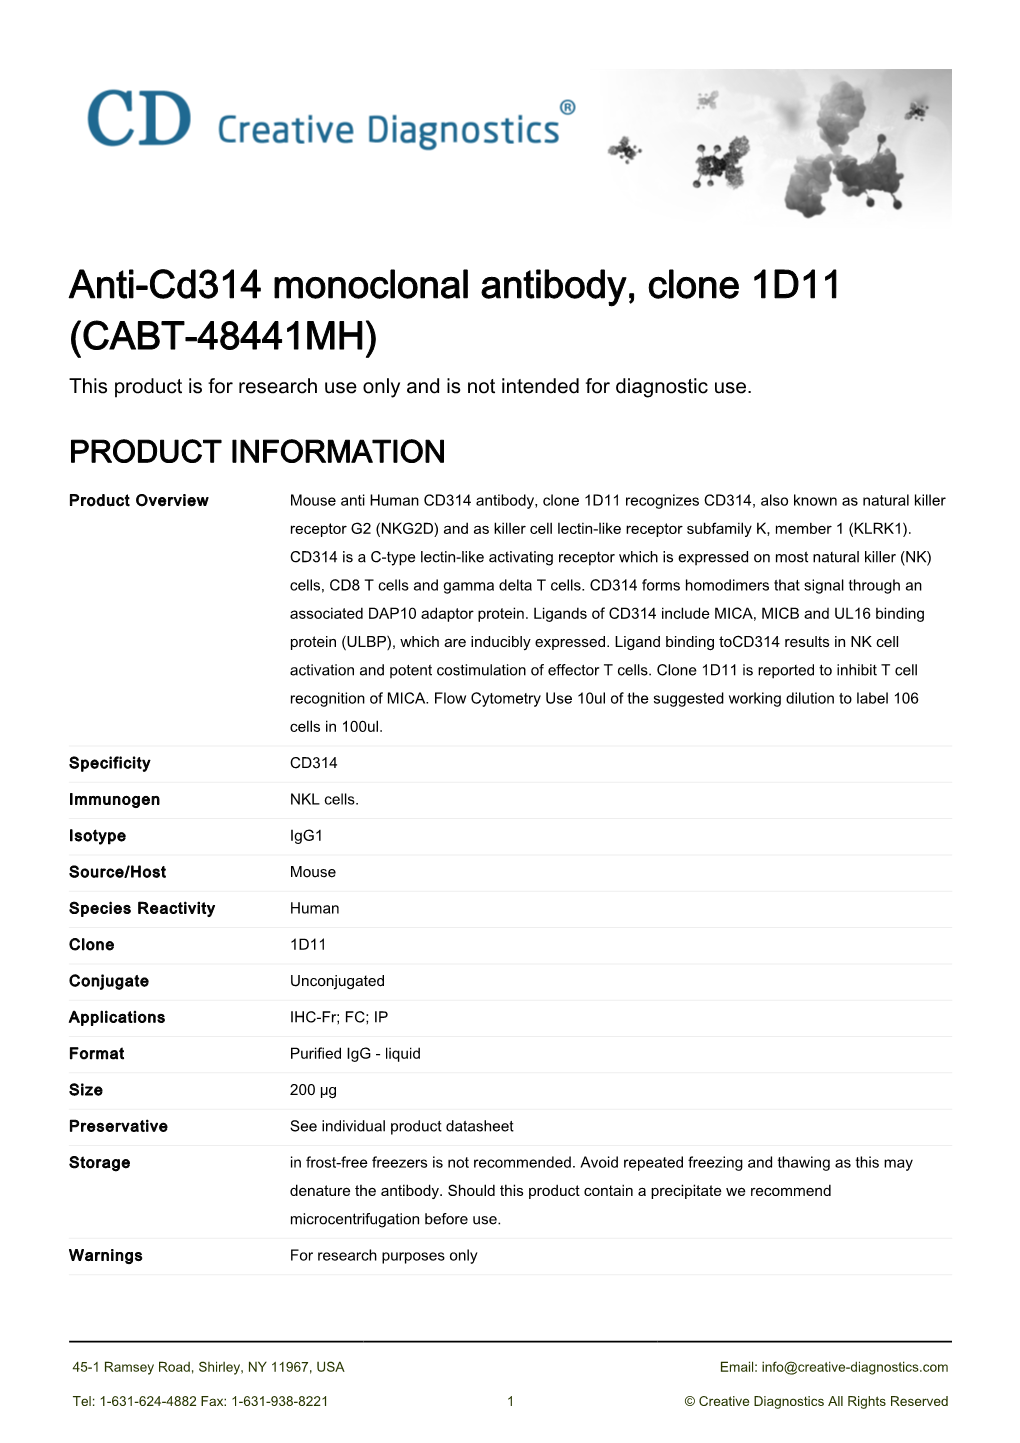 Anti-Cd314 Monoclonal Antibody, Clone 1D11 (CABT-48441MH) This Product Is for Research Use Only and Is Not Intended for Diagnostic Use